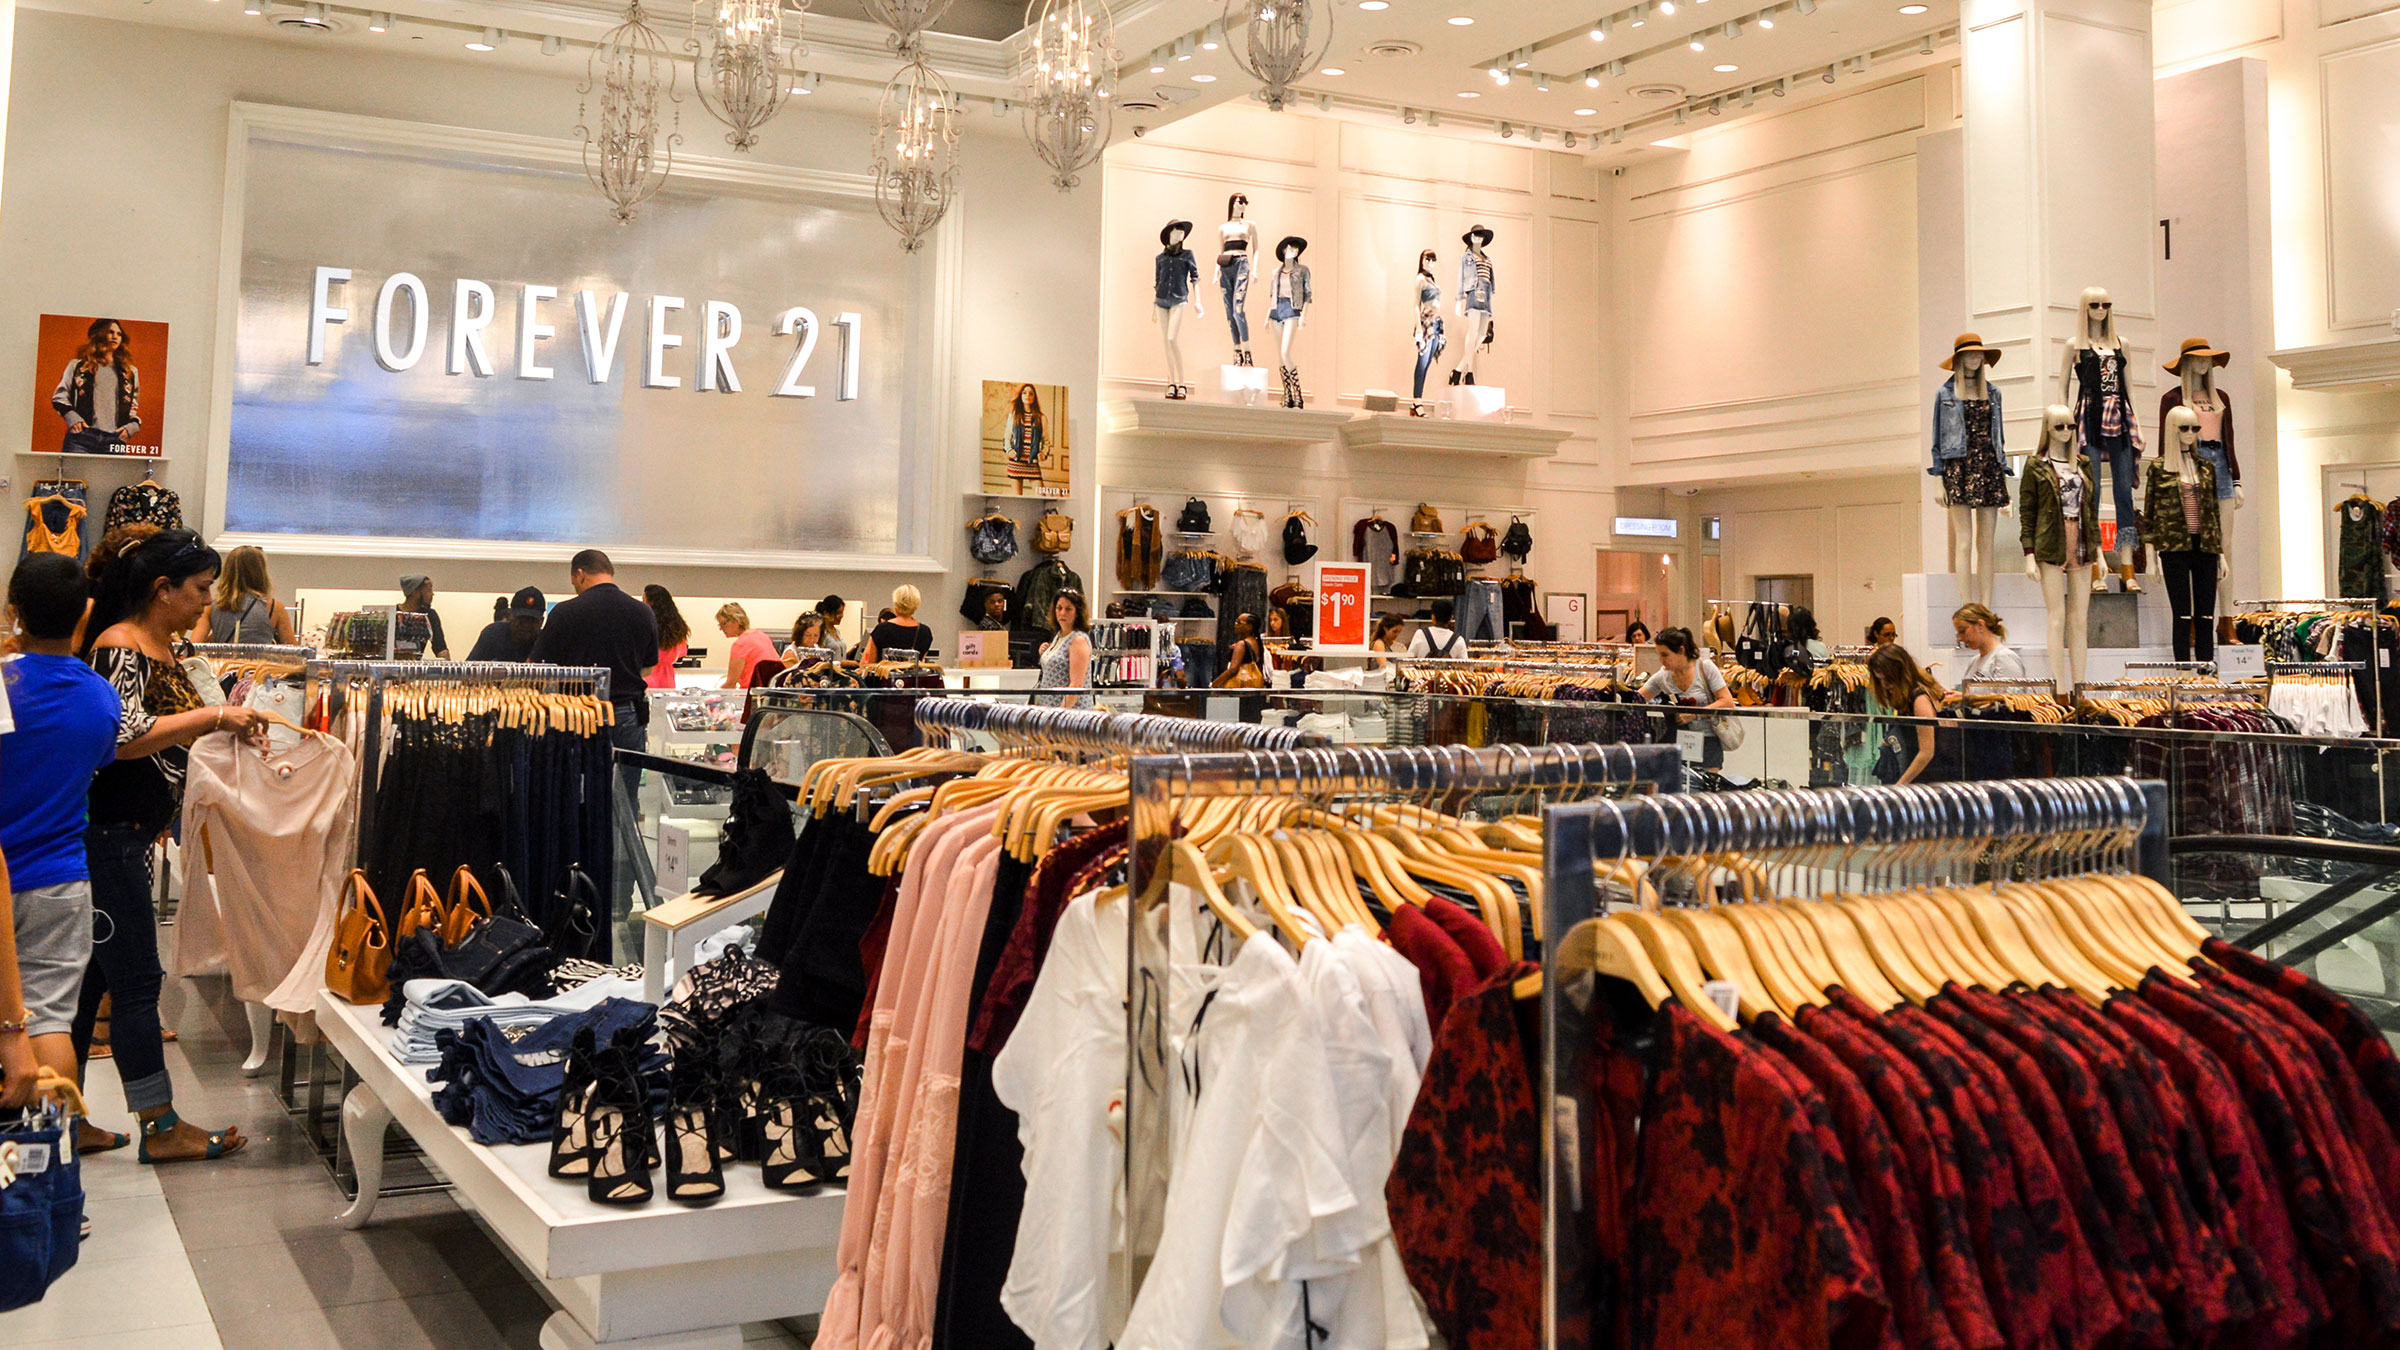 People shop at a Forever 21 store in Manhattan, New York. 